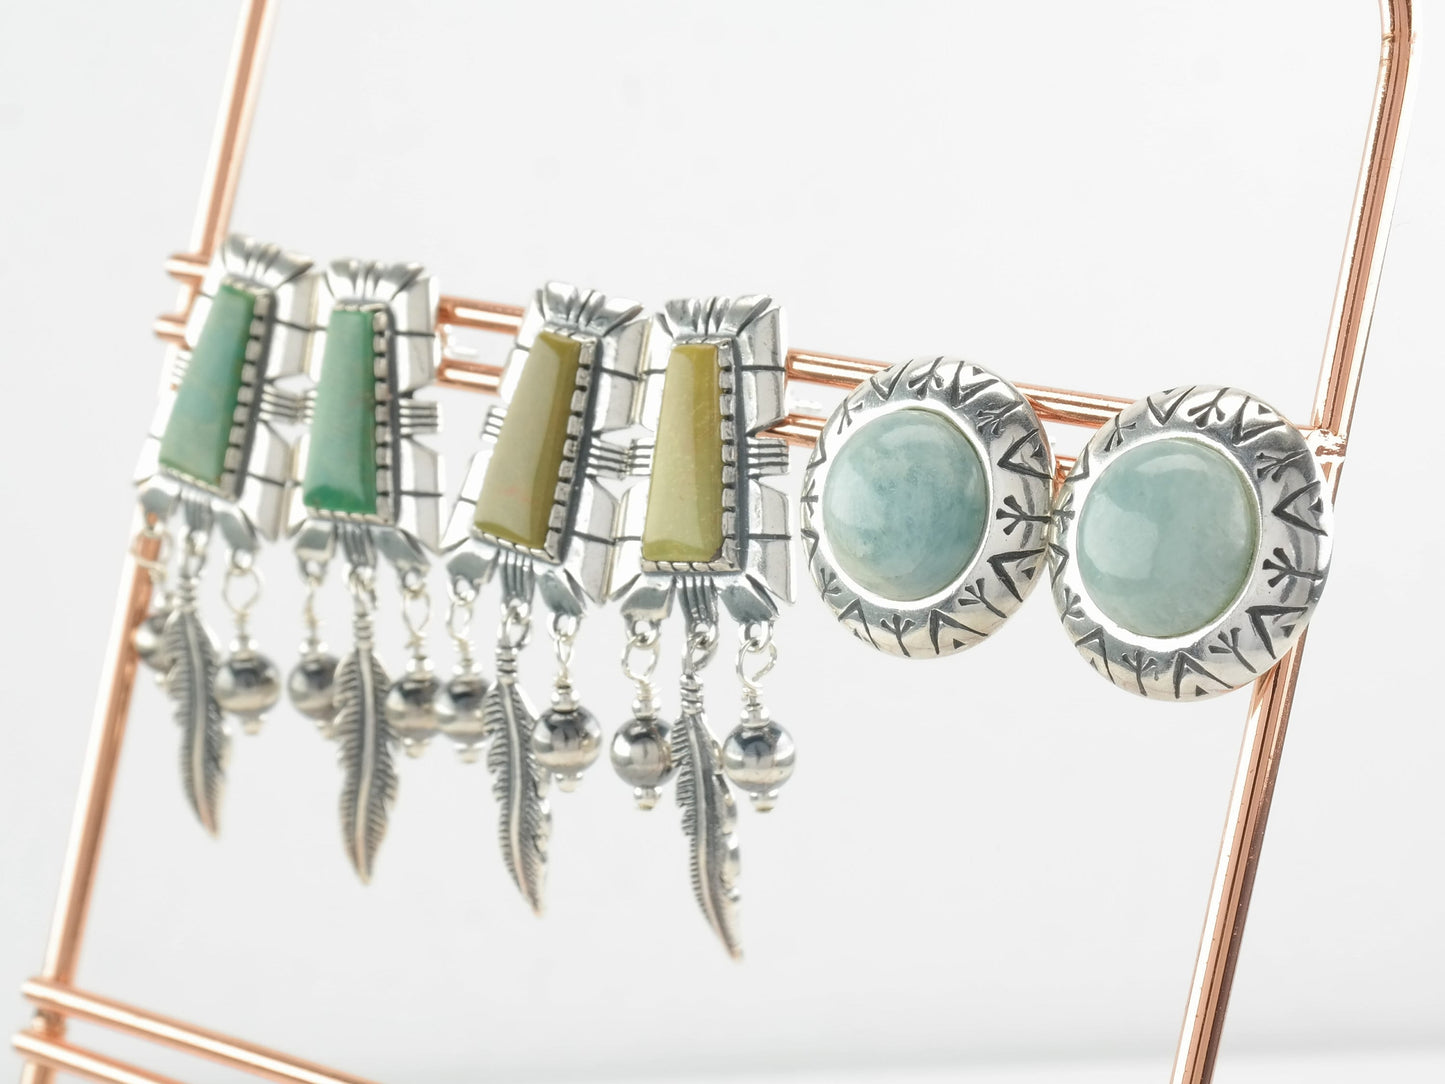 Choice of Carolyn Pollack Sterling Silver Turquoise, Larimar, Feather, Stamped Earrings Dangle, Stud